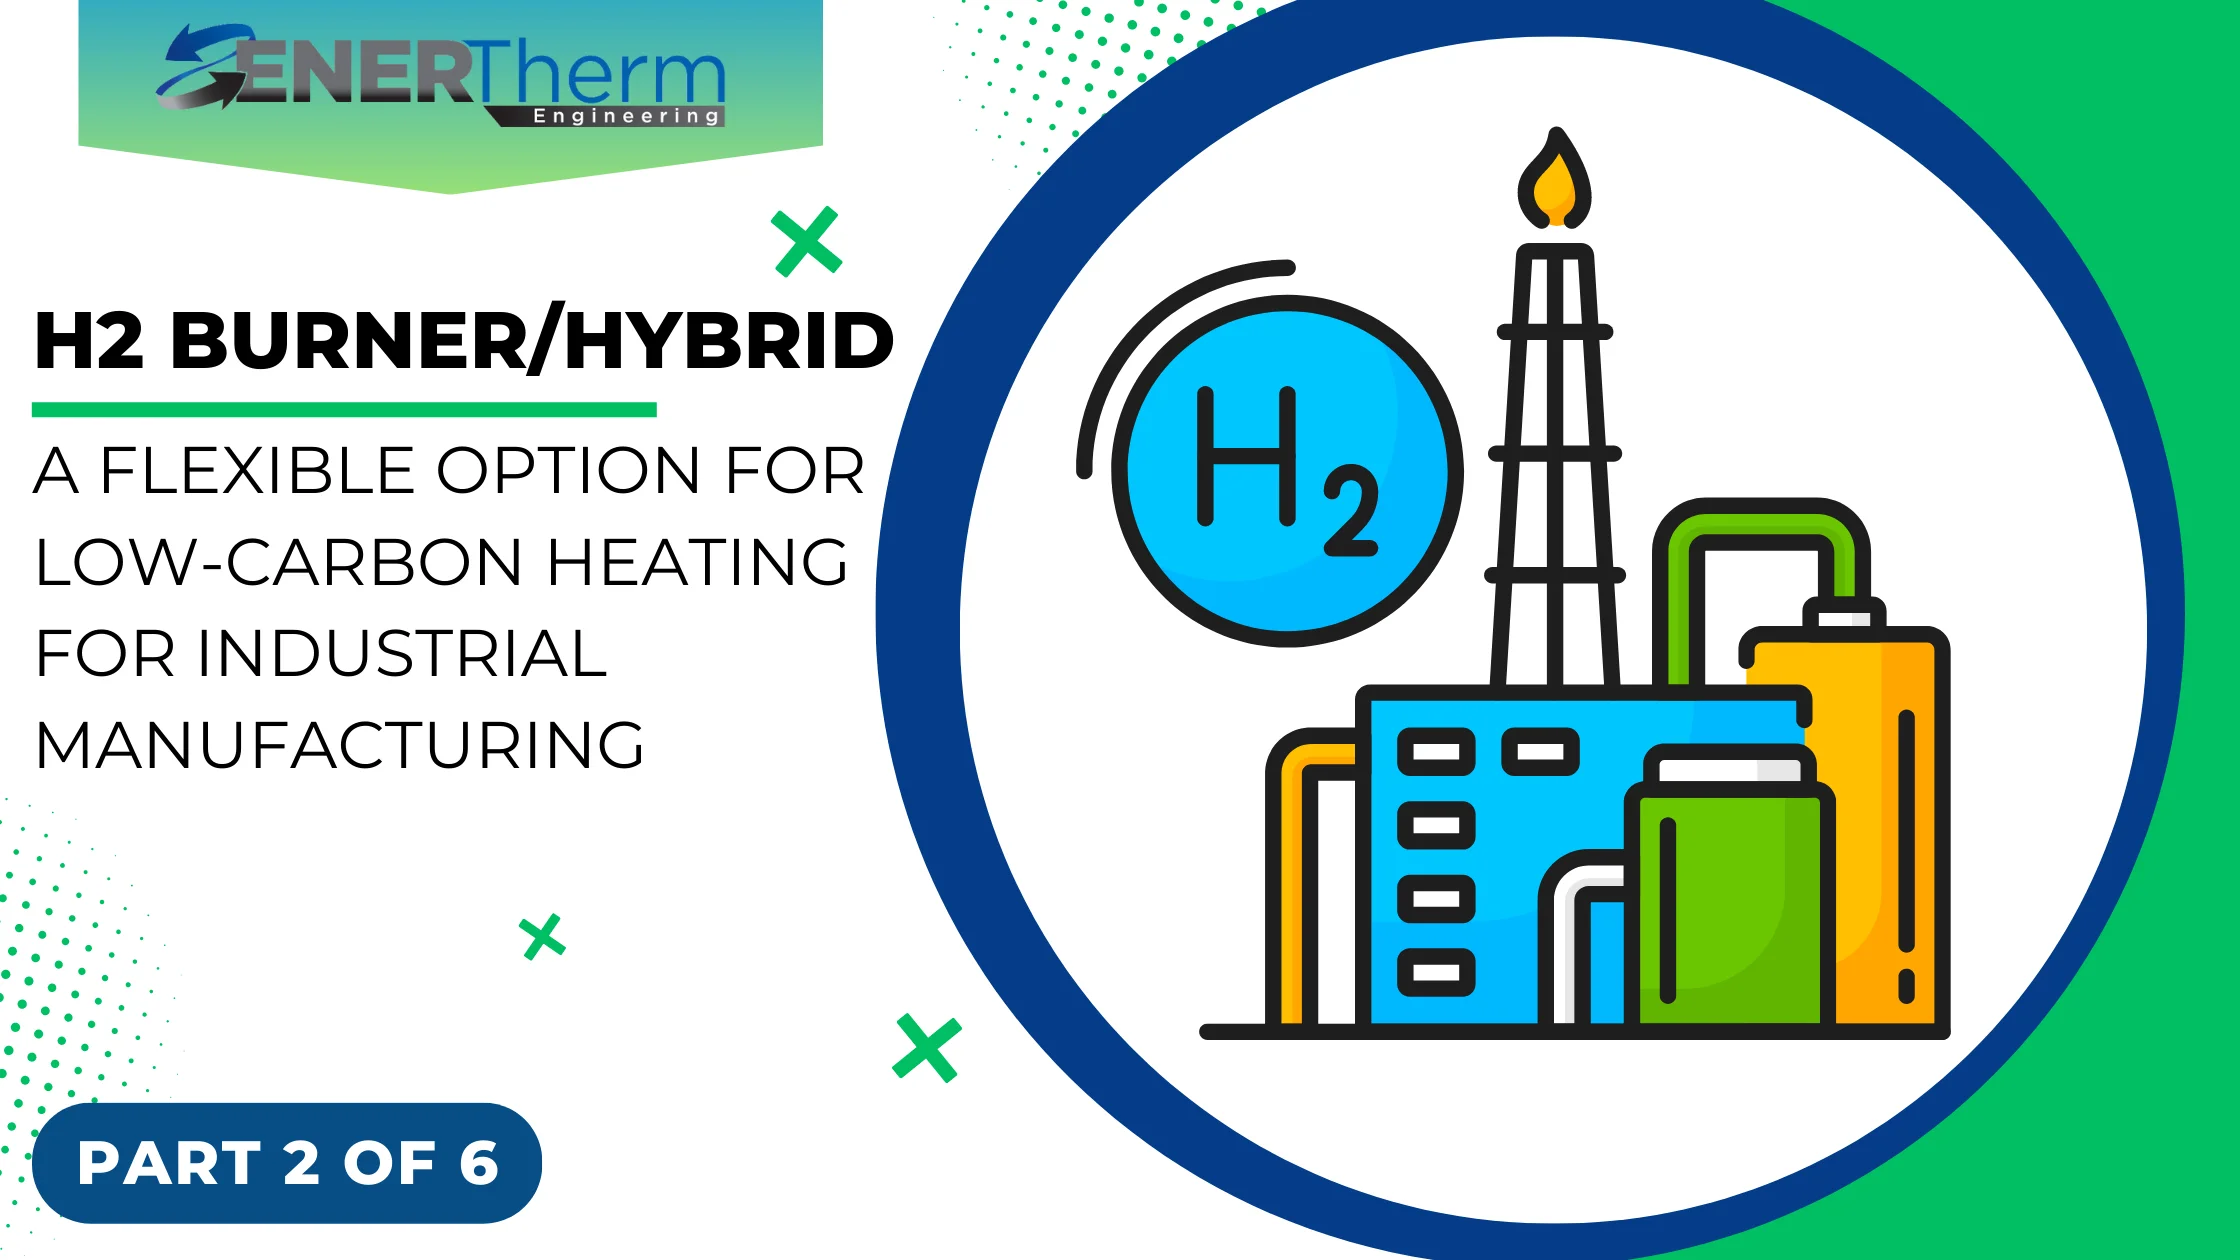 H2 BurnerHybrid A Flexible Option for Low-Carbon Heating for Industrial Manufacturing (PART 2) 